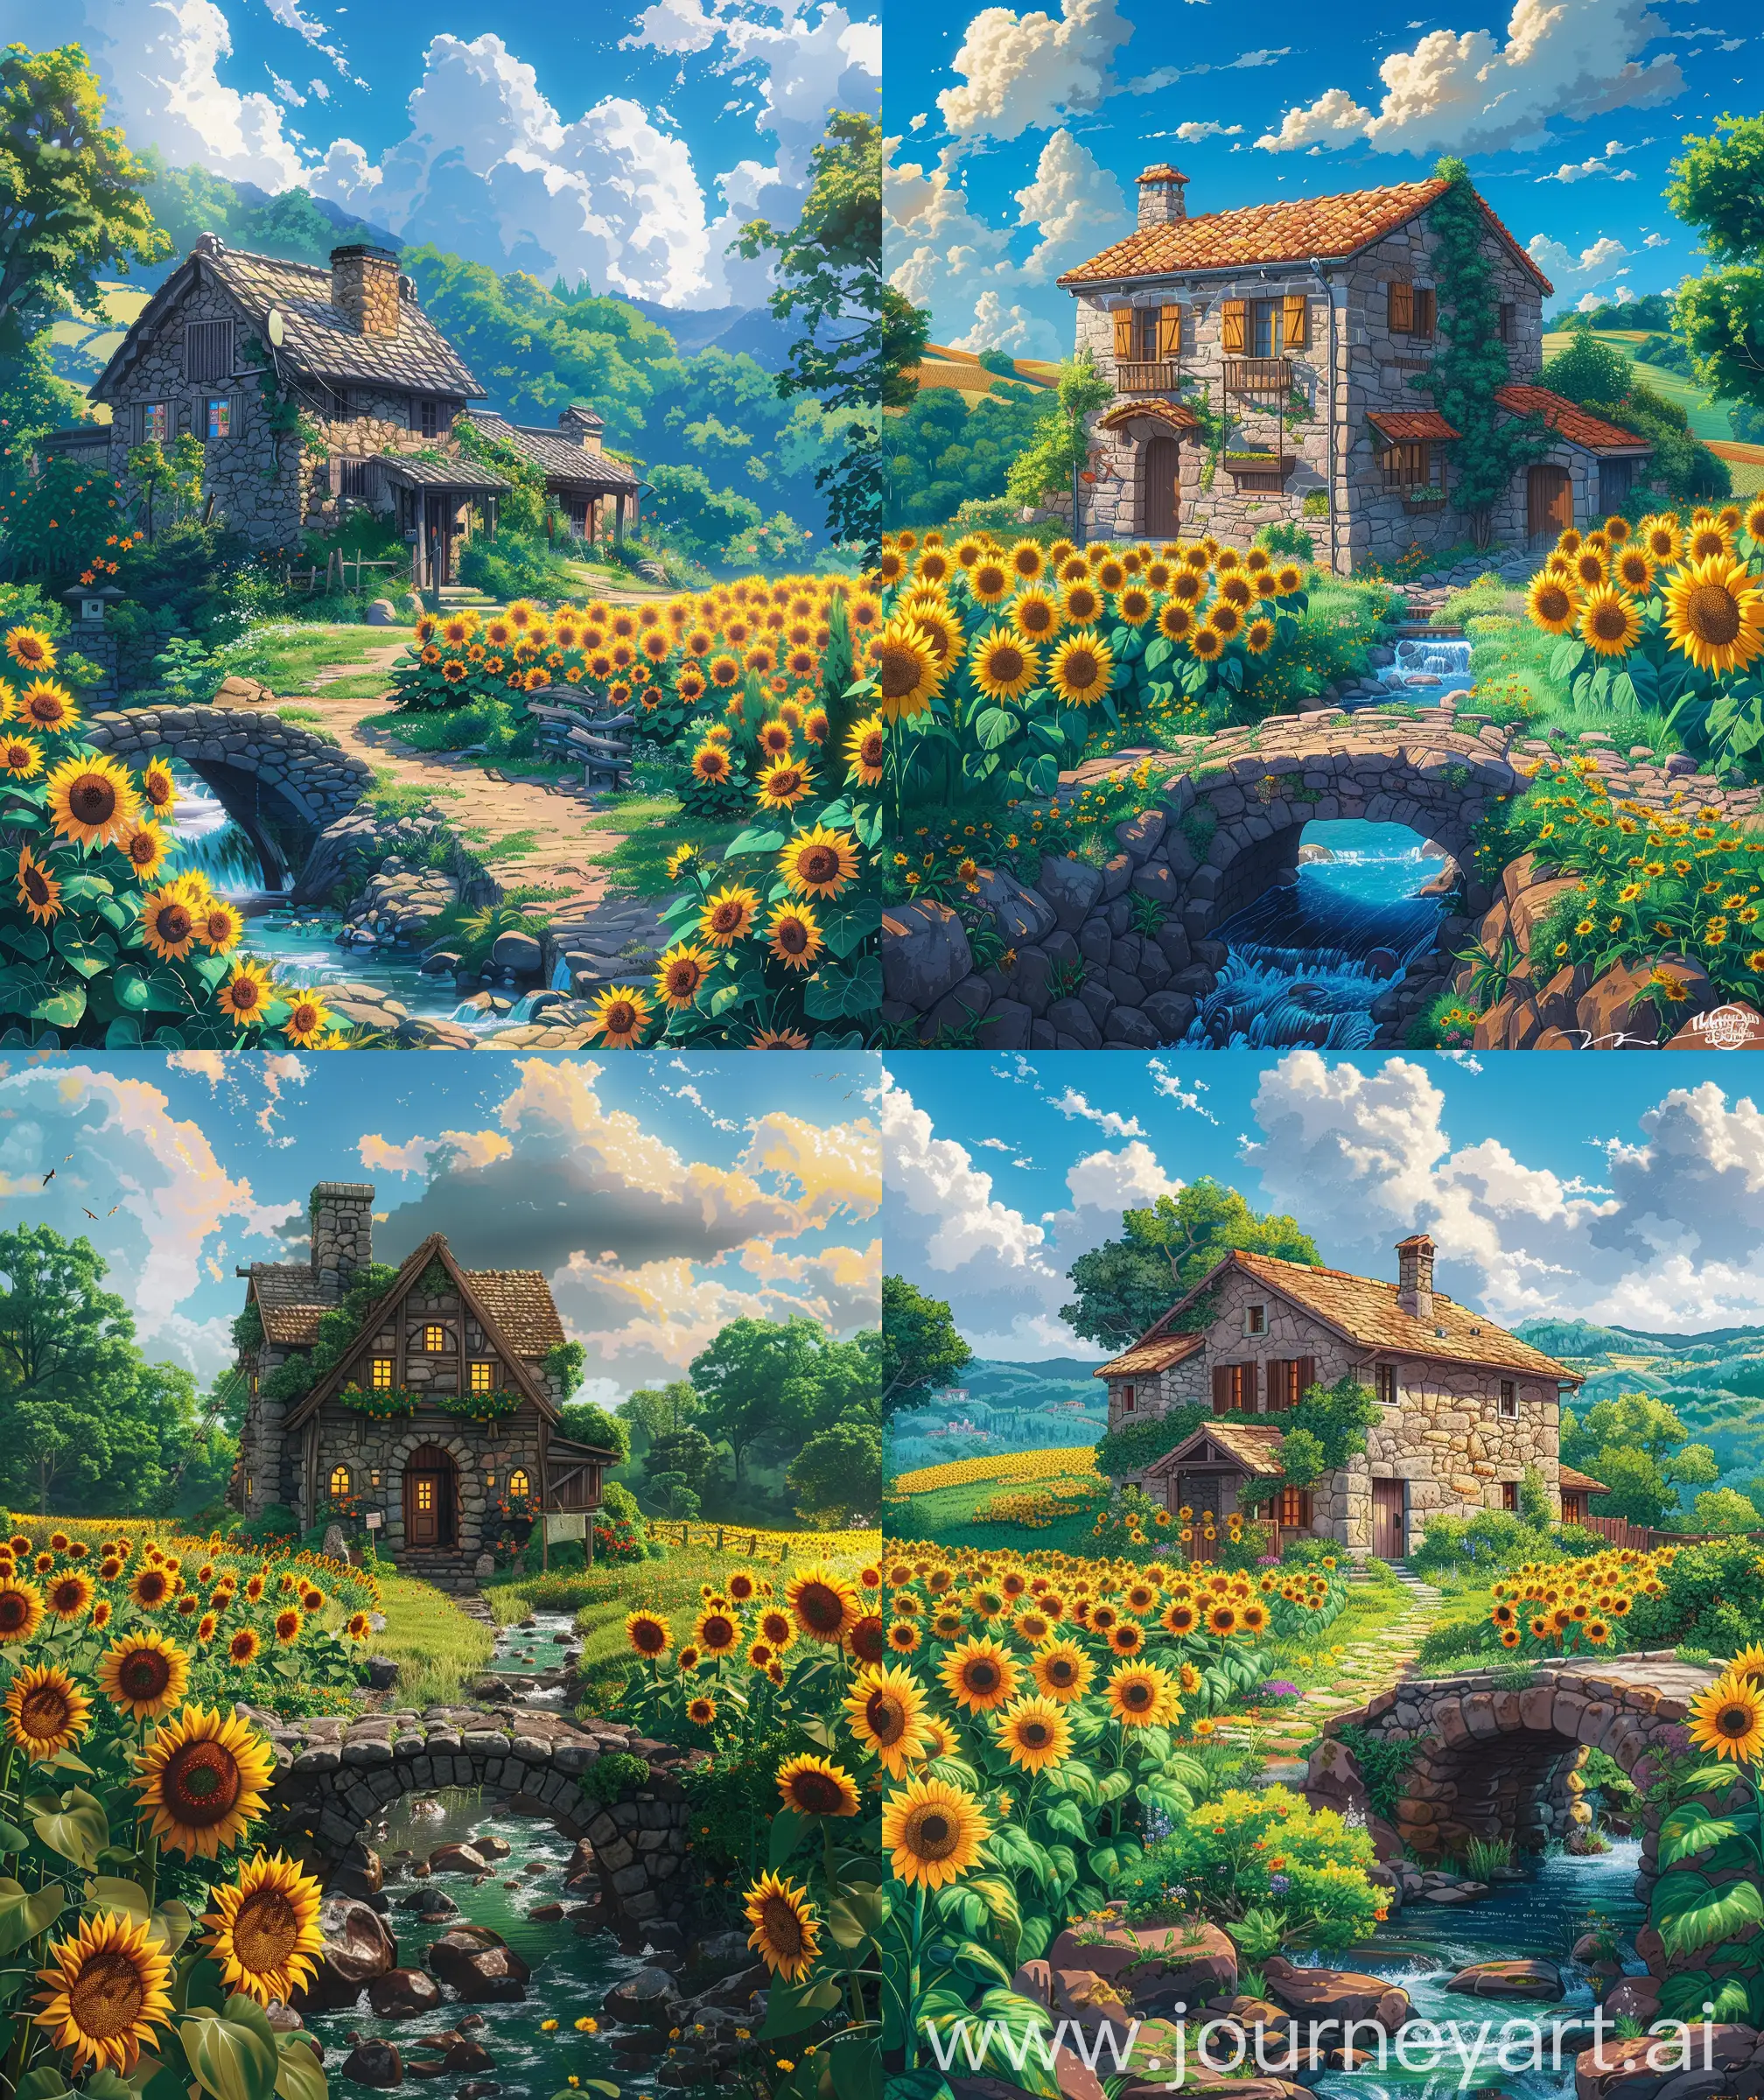 Beautiful anime scenery, illustration, mokoto shinkai and ghibli style mix, direct front fecade view of quaint stone house, sunflower field, small stone bridge over stream, day time, beautiful sky, Vibrant look, ultra HD, high quality, sharp detail, no hyperrealistic --ar 27:32 --s 400